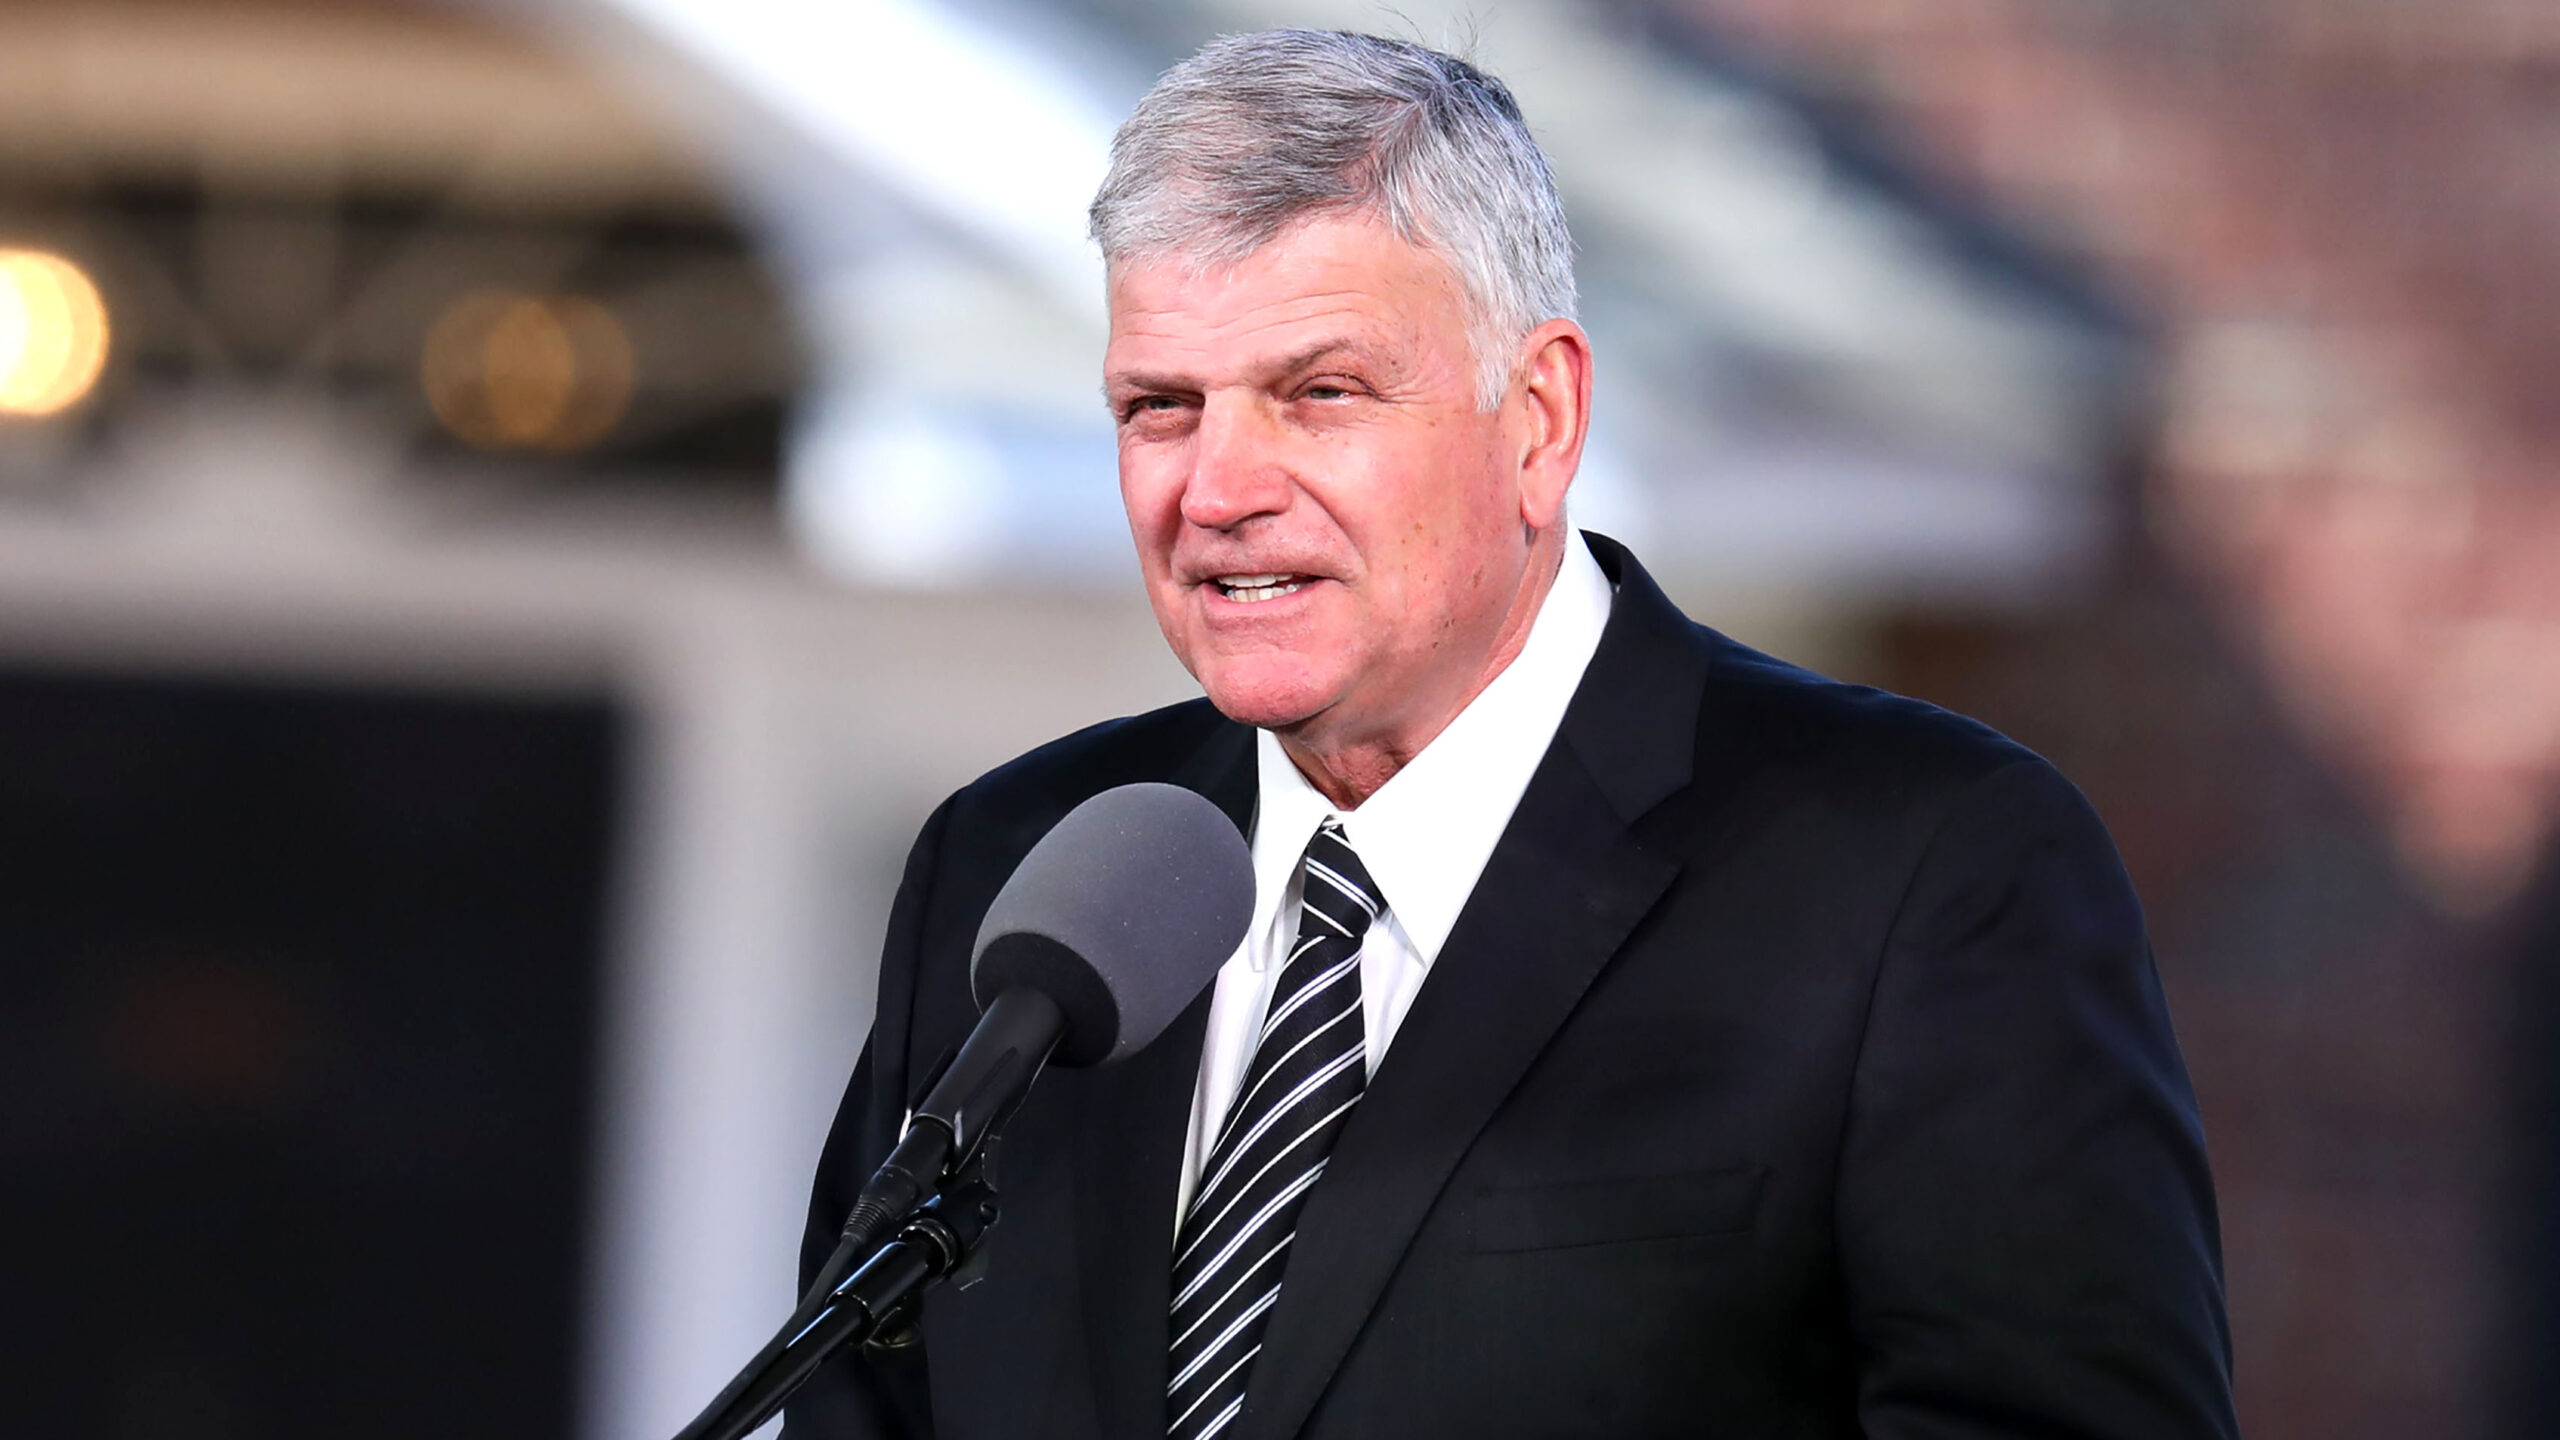 Franklin Graham Praises DeSantis For Cracking Down On Hotel That Hosted Drag Queen Event With Kids Present